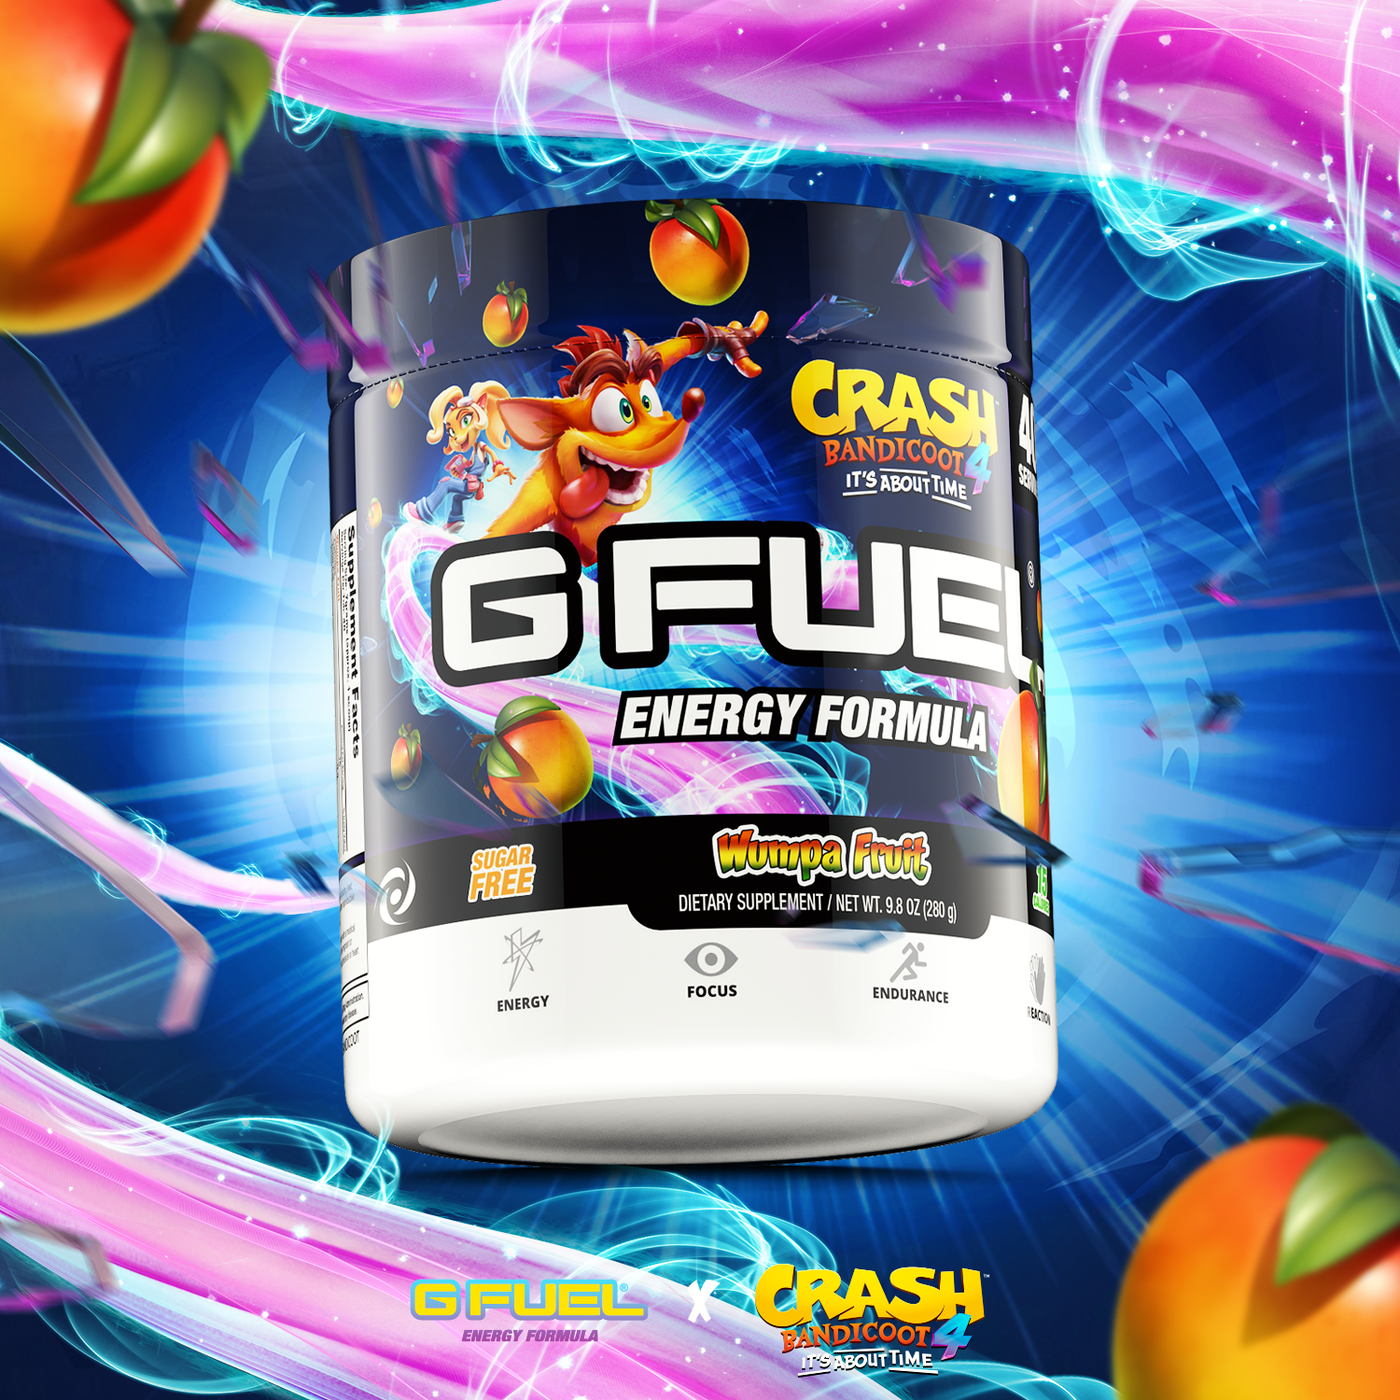 A G FUEL Wumpa Fruit Tub, inspired by Activision's new game Crash Bandicoot™ 4: It’s About Time.